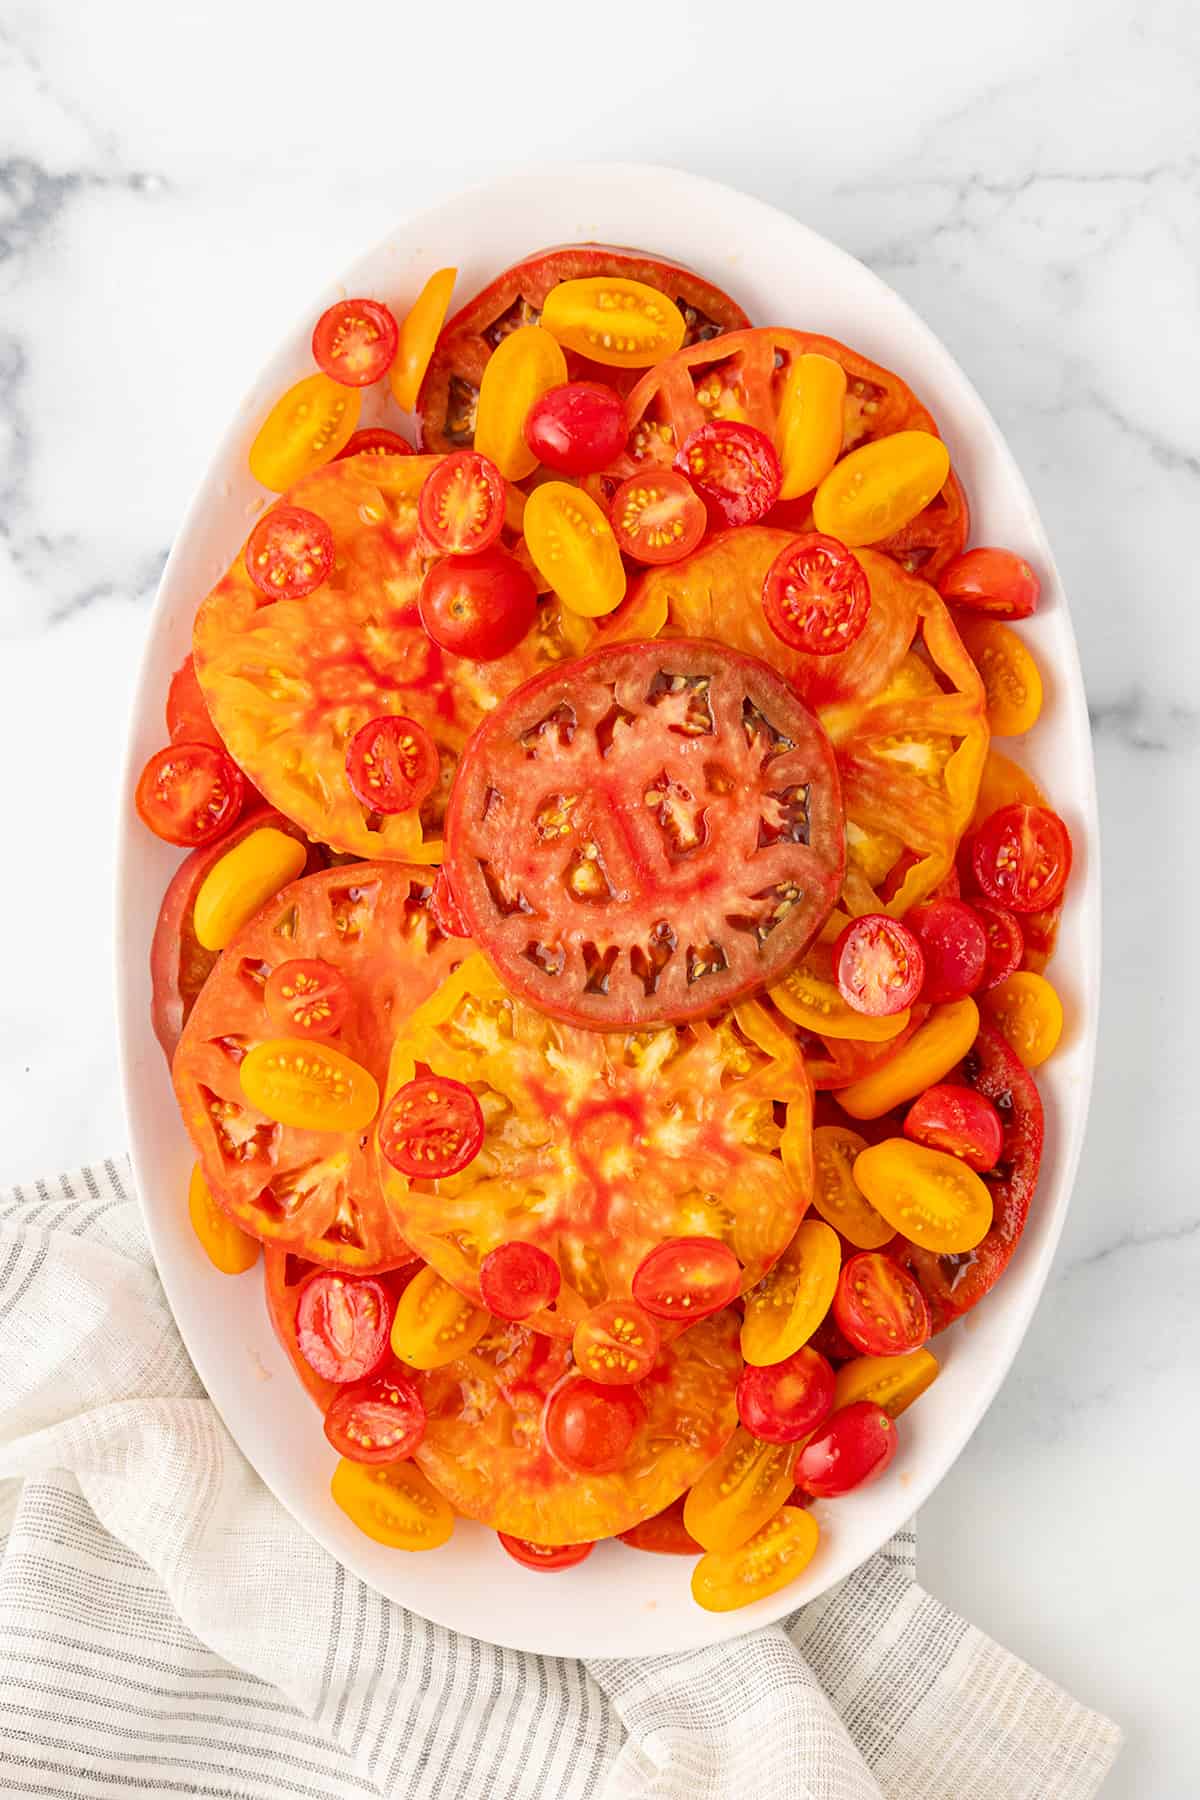 A large white platter with several slices of heirloom tomatoes, and several orange and red cherry tomatoes with a grey and white striped napkin on a white counter top.